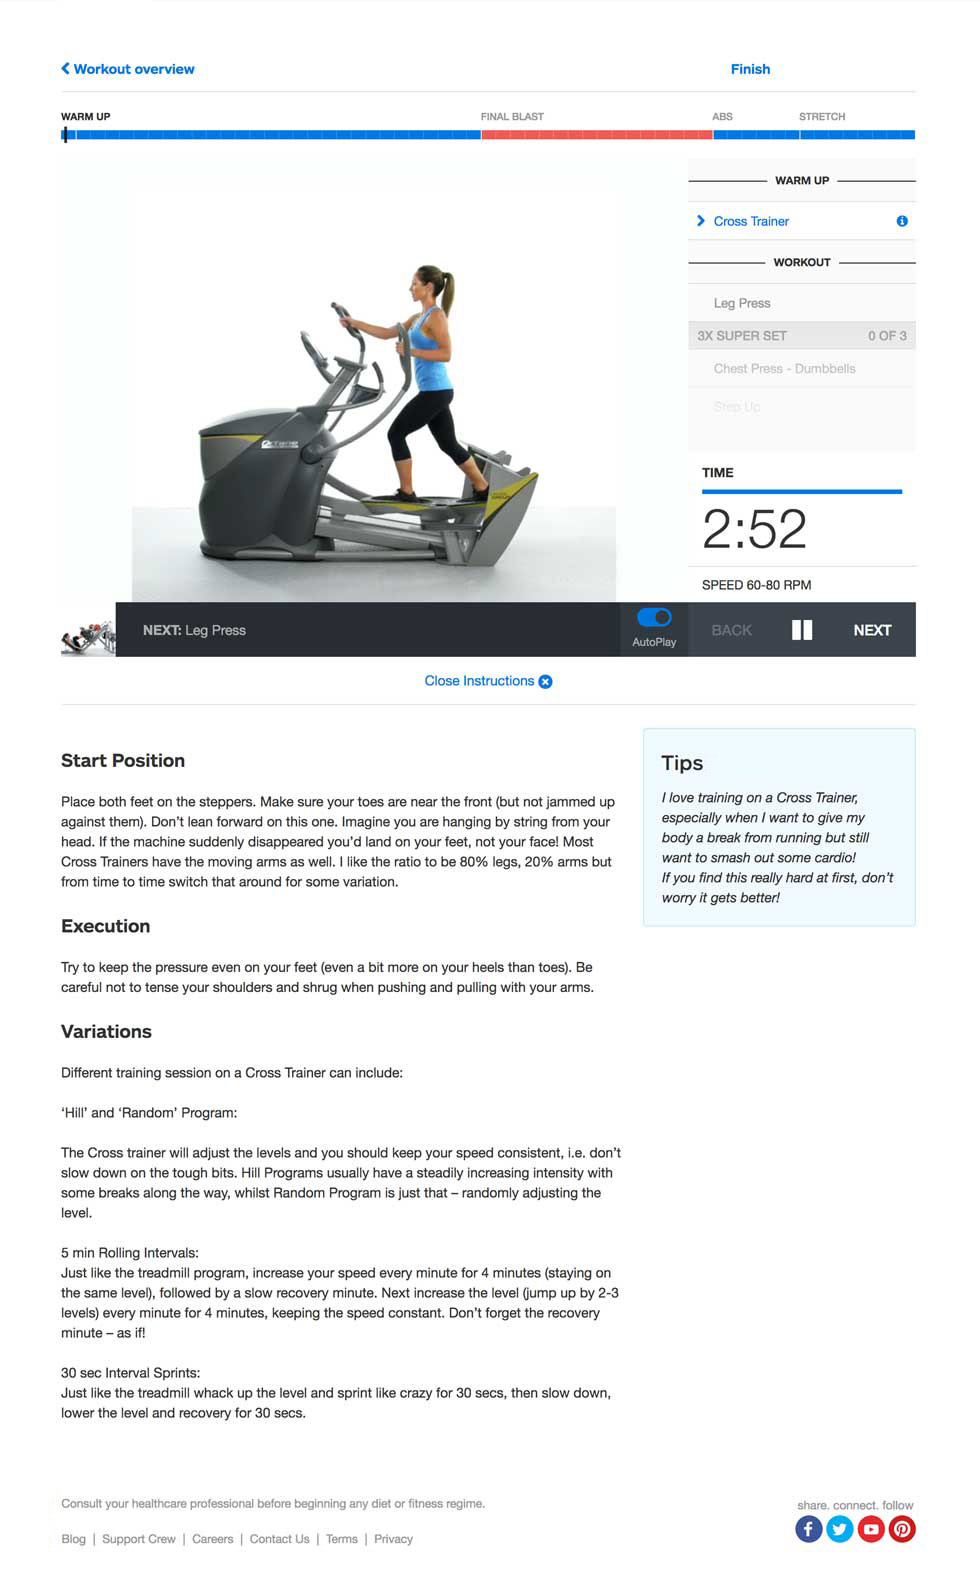 How We Scaled Video Content Delivery for Individualised Workouts desktop layout